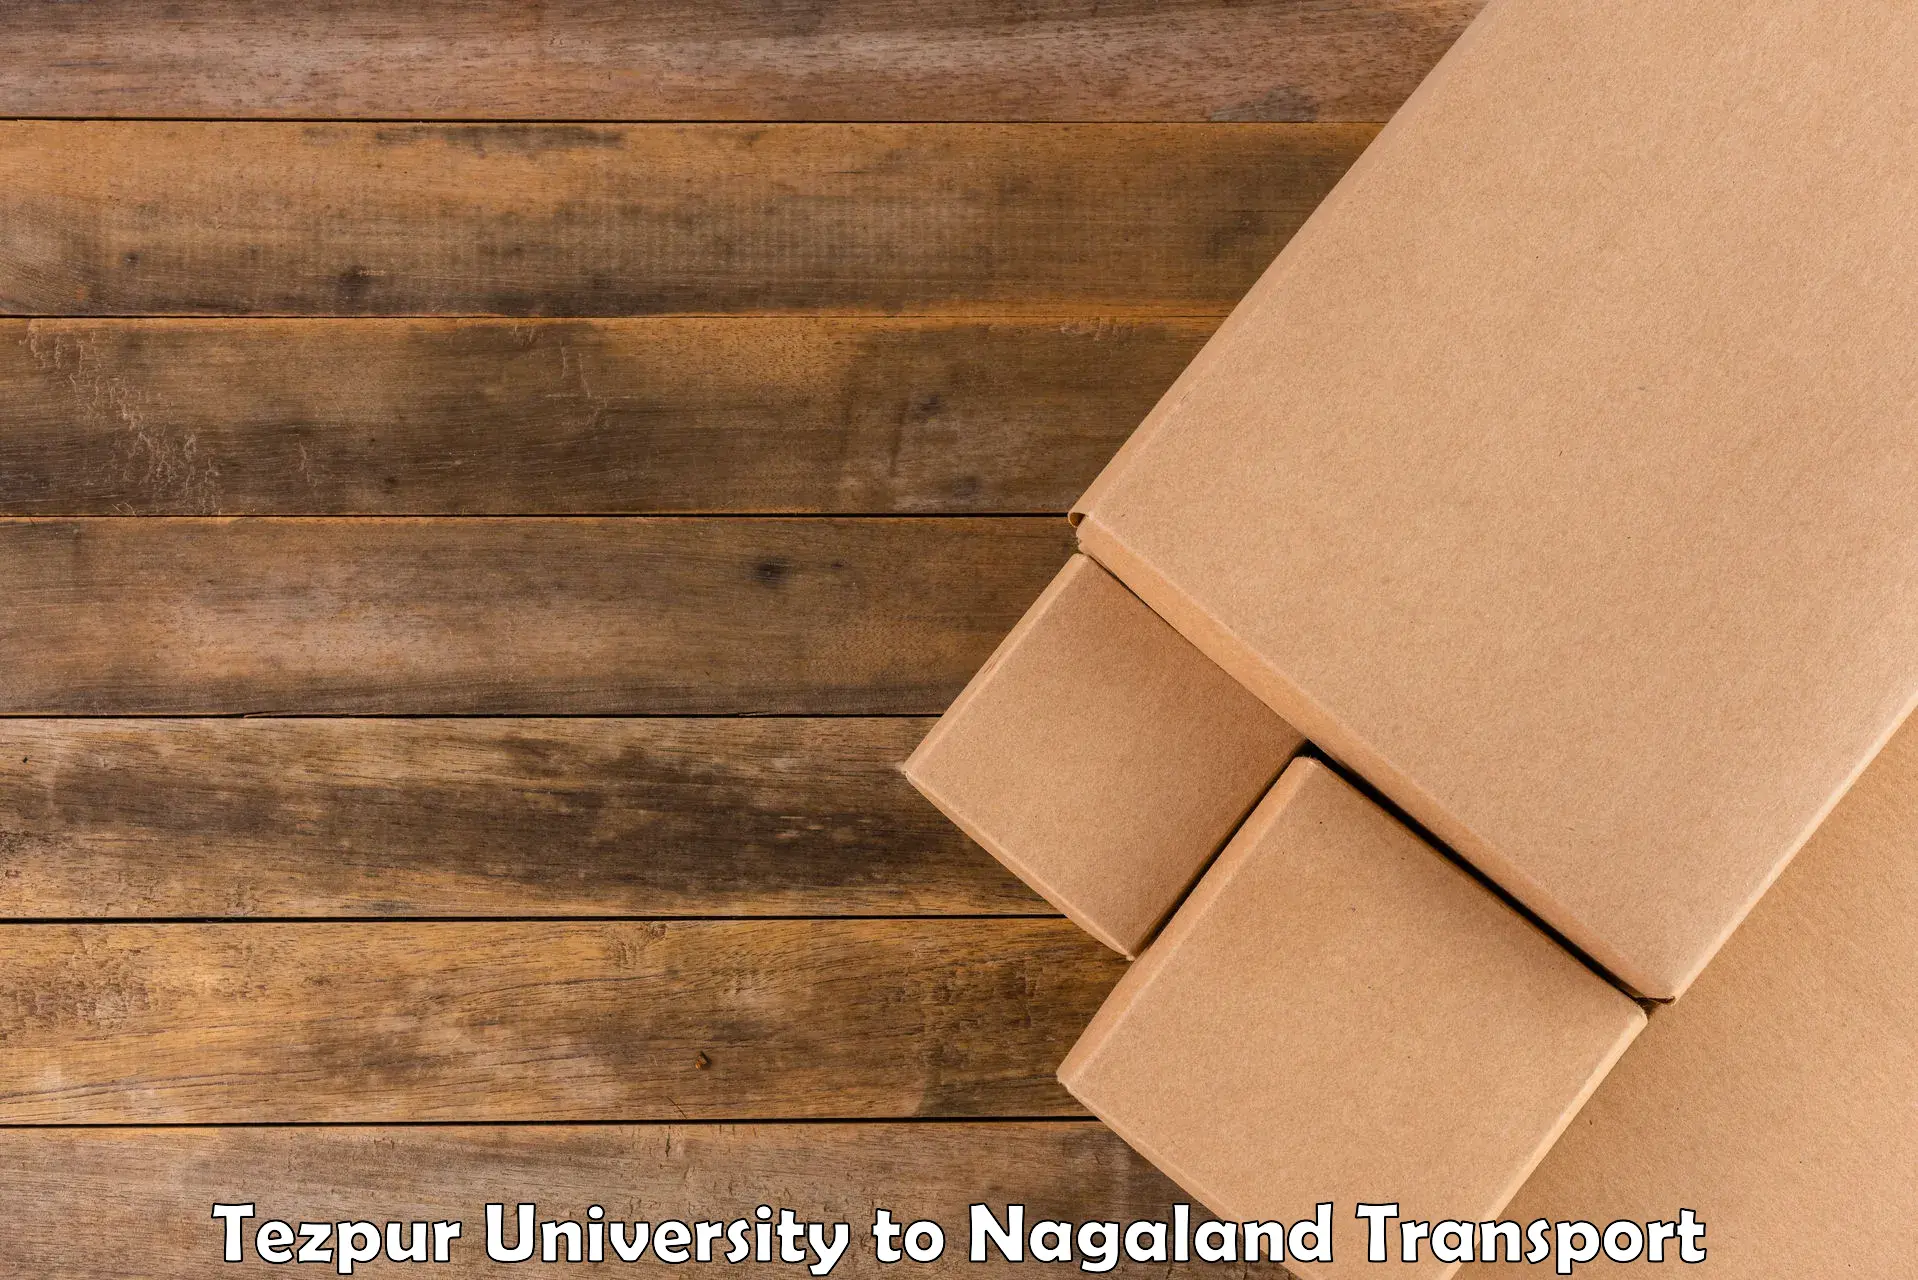 Lorry transport service in Tezpur University to Nagaland